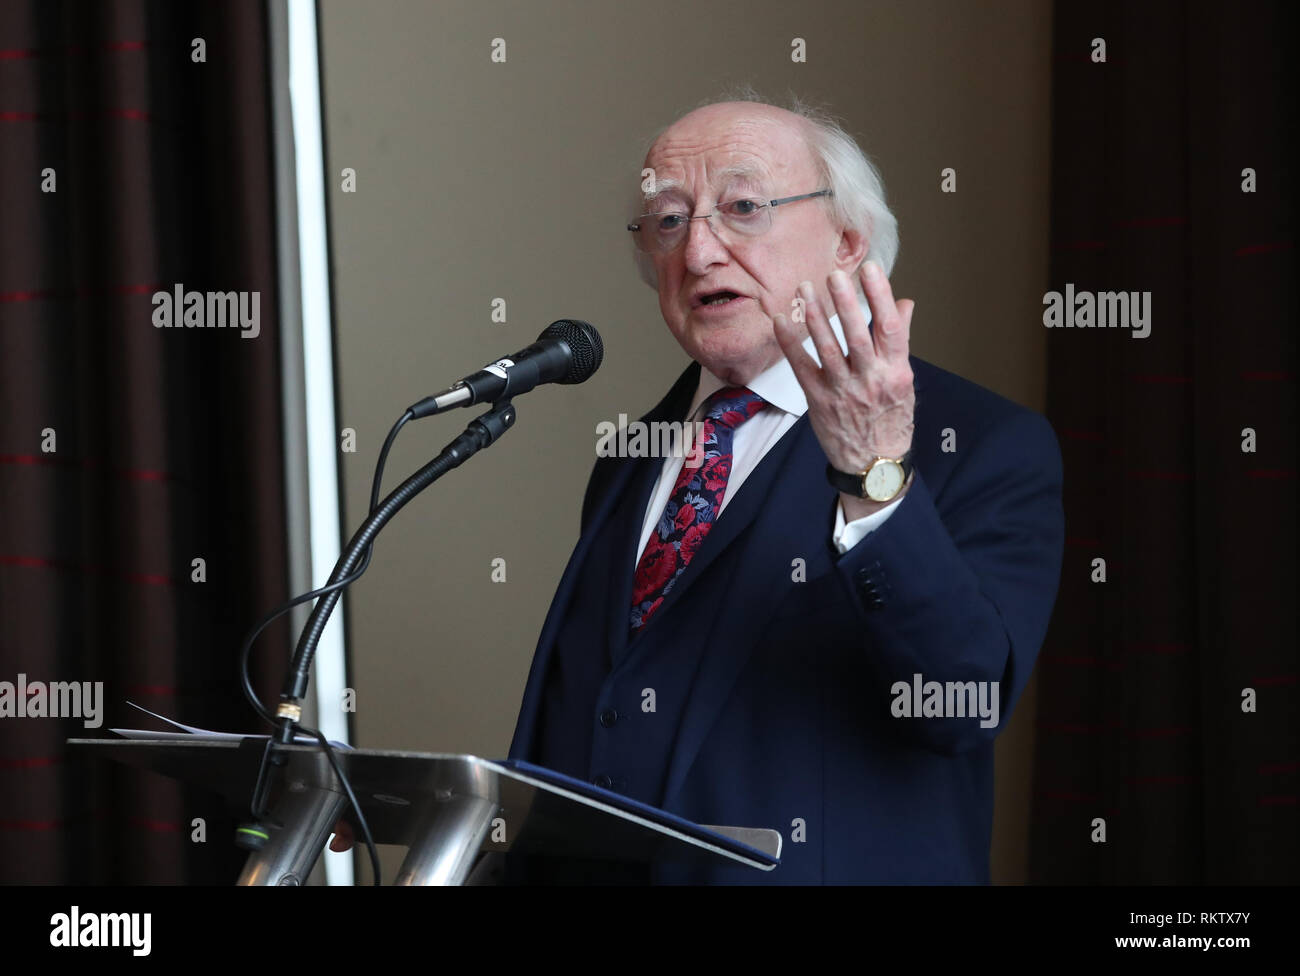 Irish President Michael D Higgins addresses a business lunch with state agencies at the Hilton Hotel in Liverpool on the second day of an official visit to the UK. Stock Photo